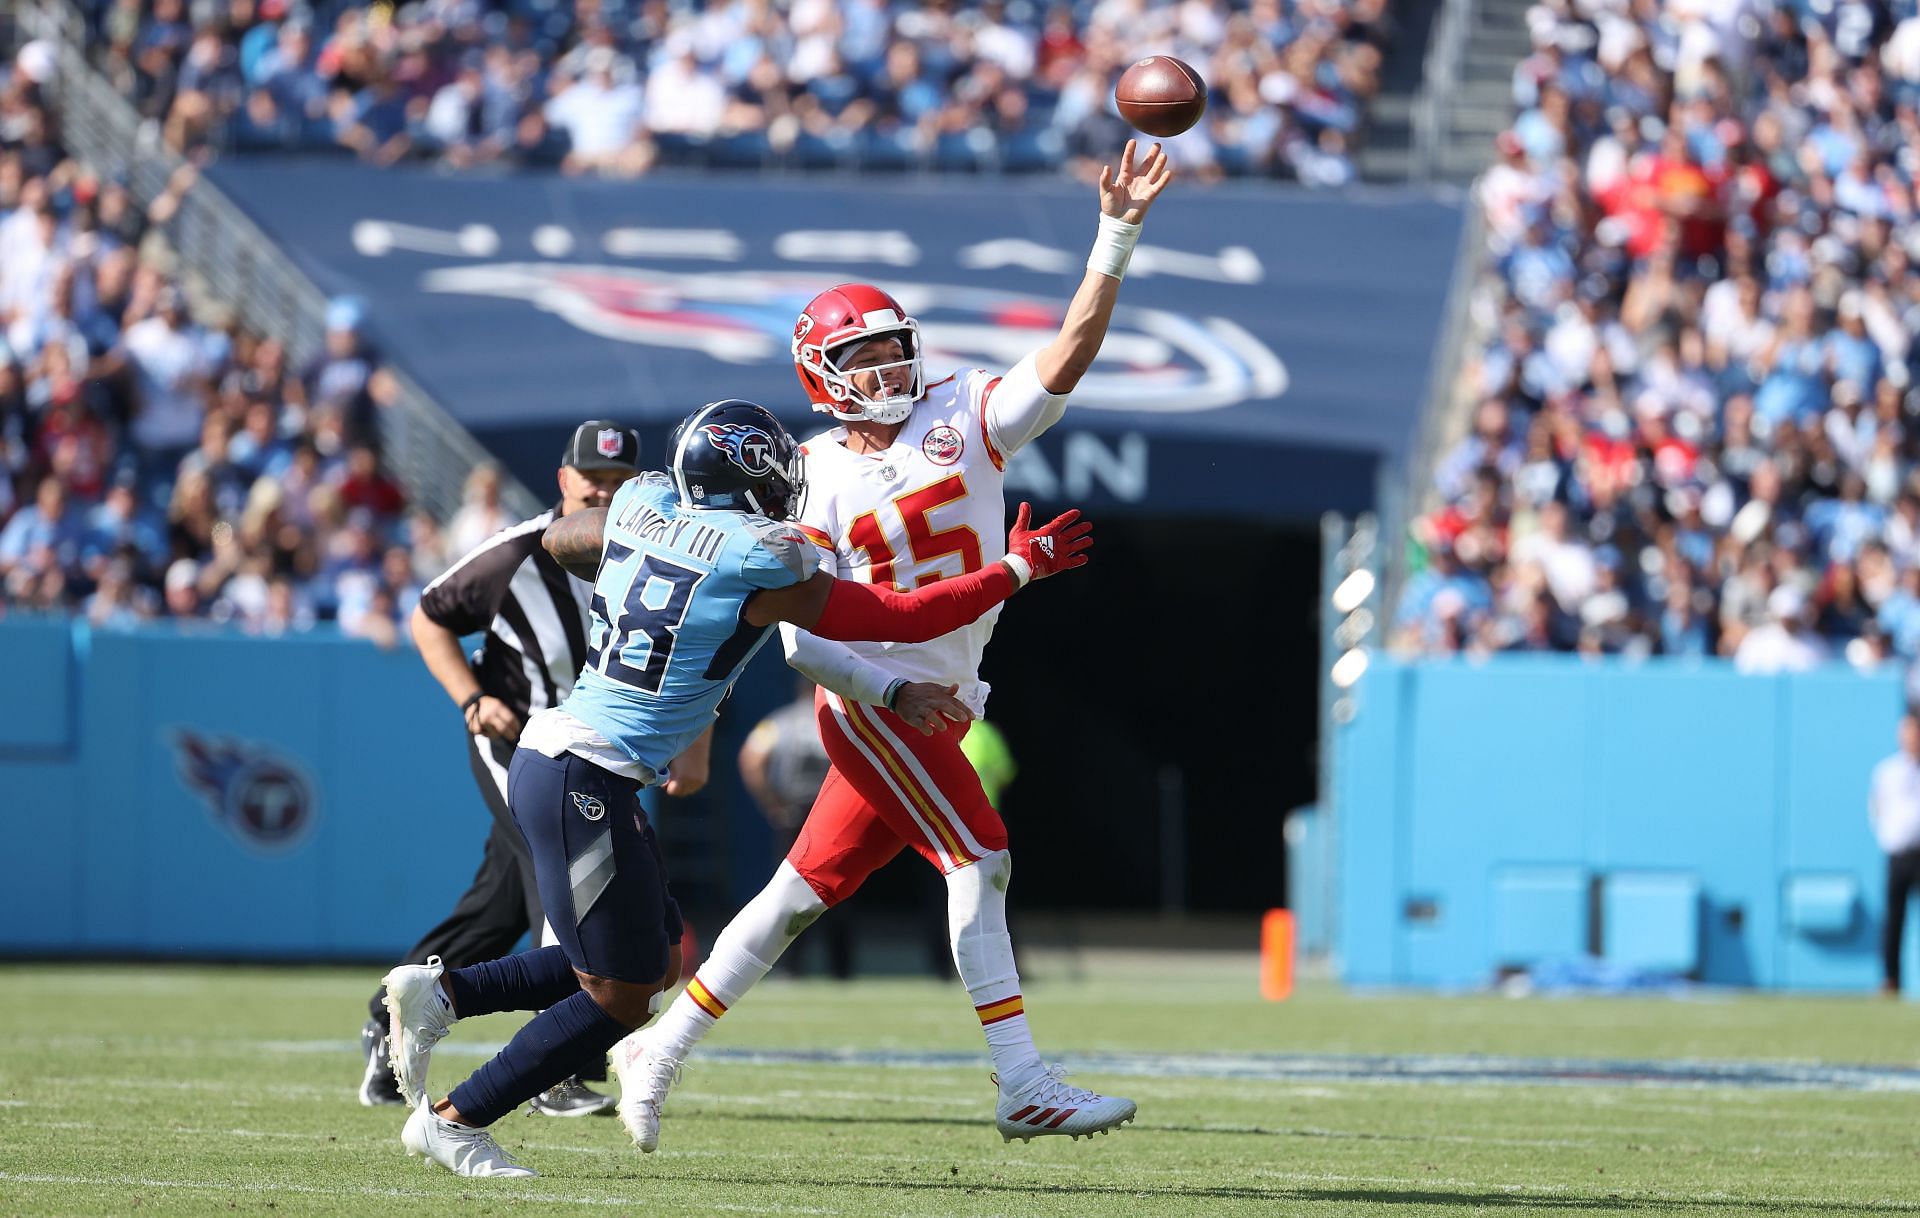 Mahomes narrowly escapes a sack against the Titans